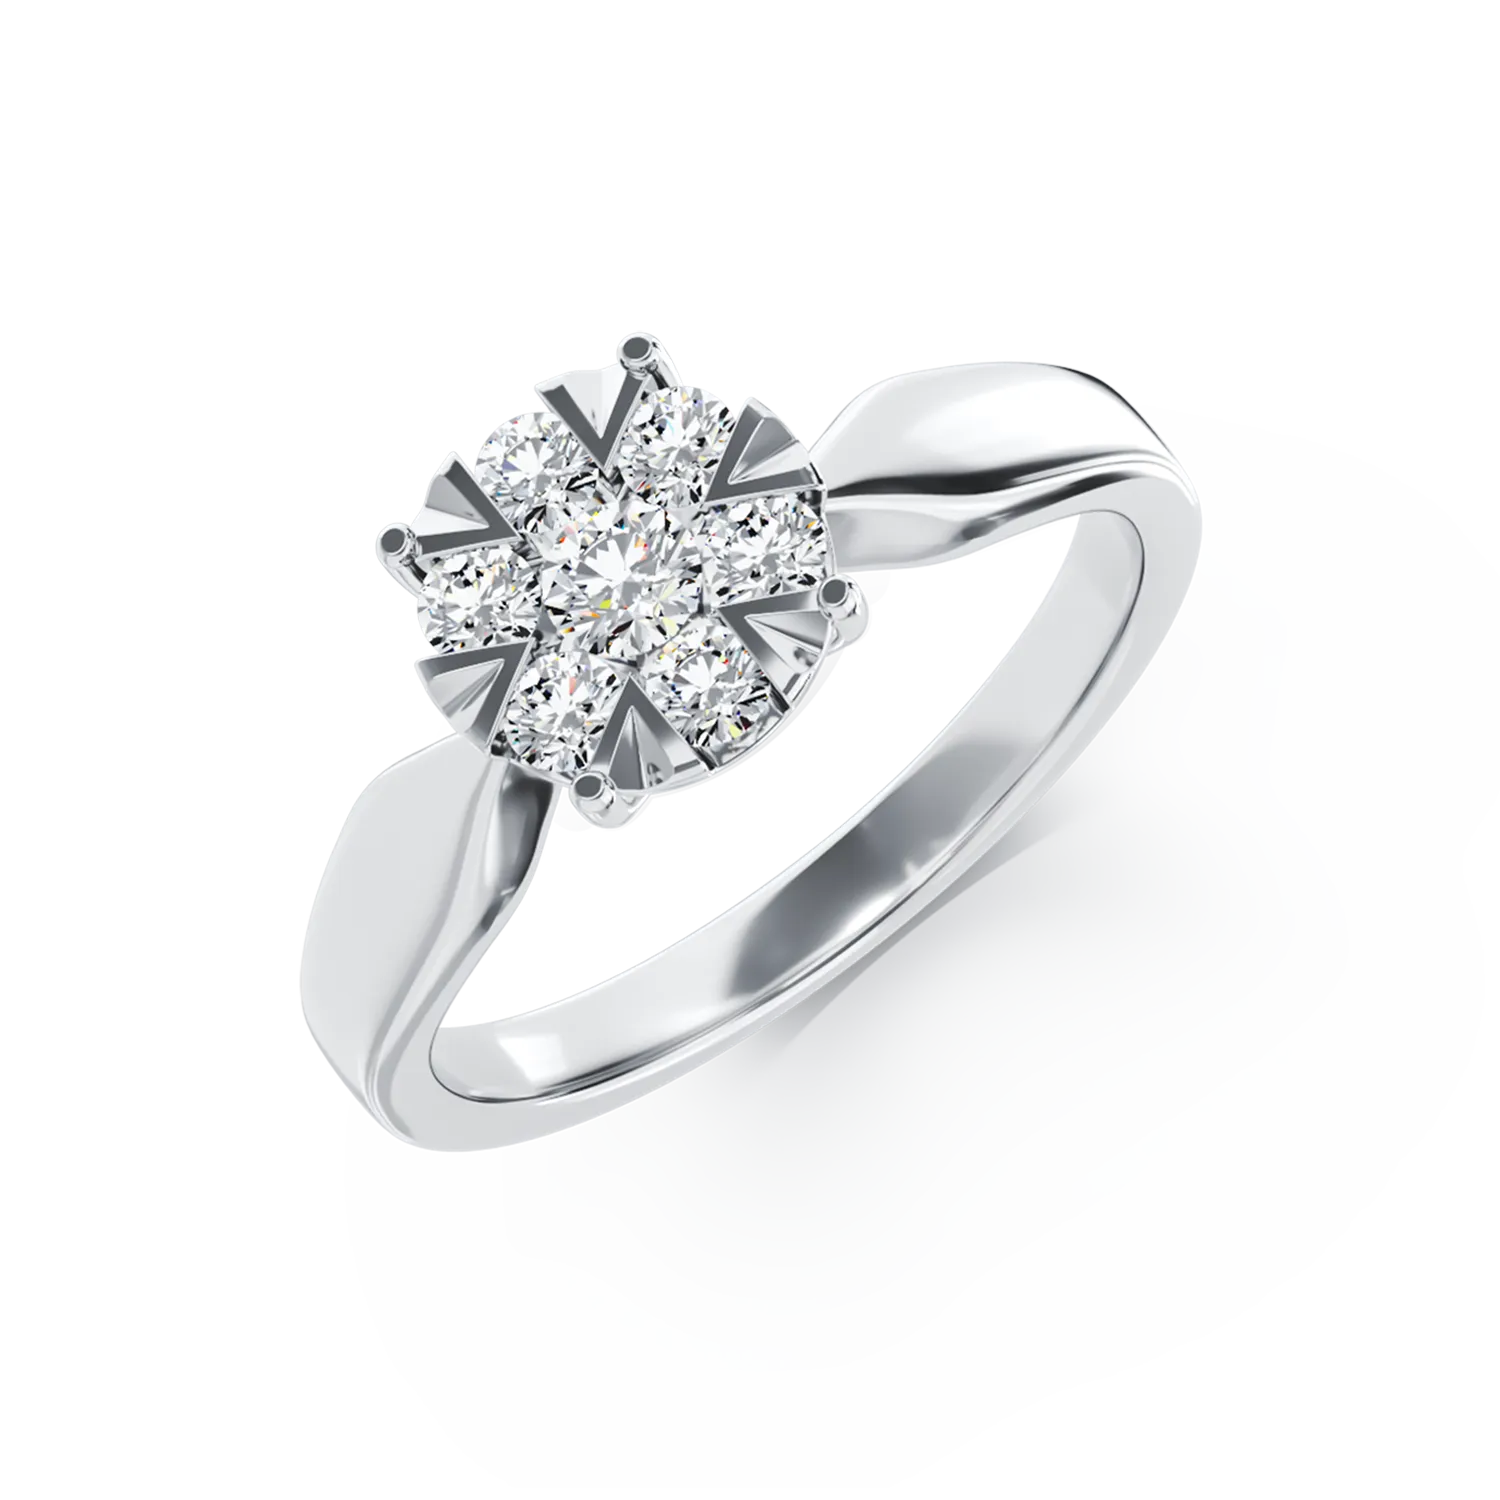 18K white gold engagement ring with 0.34ct diamonds